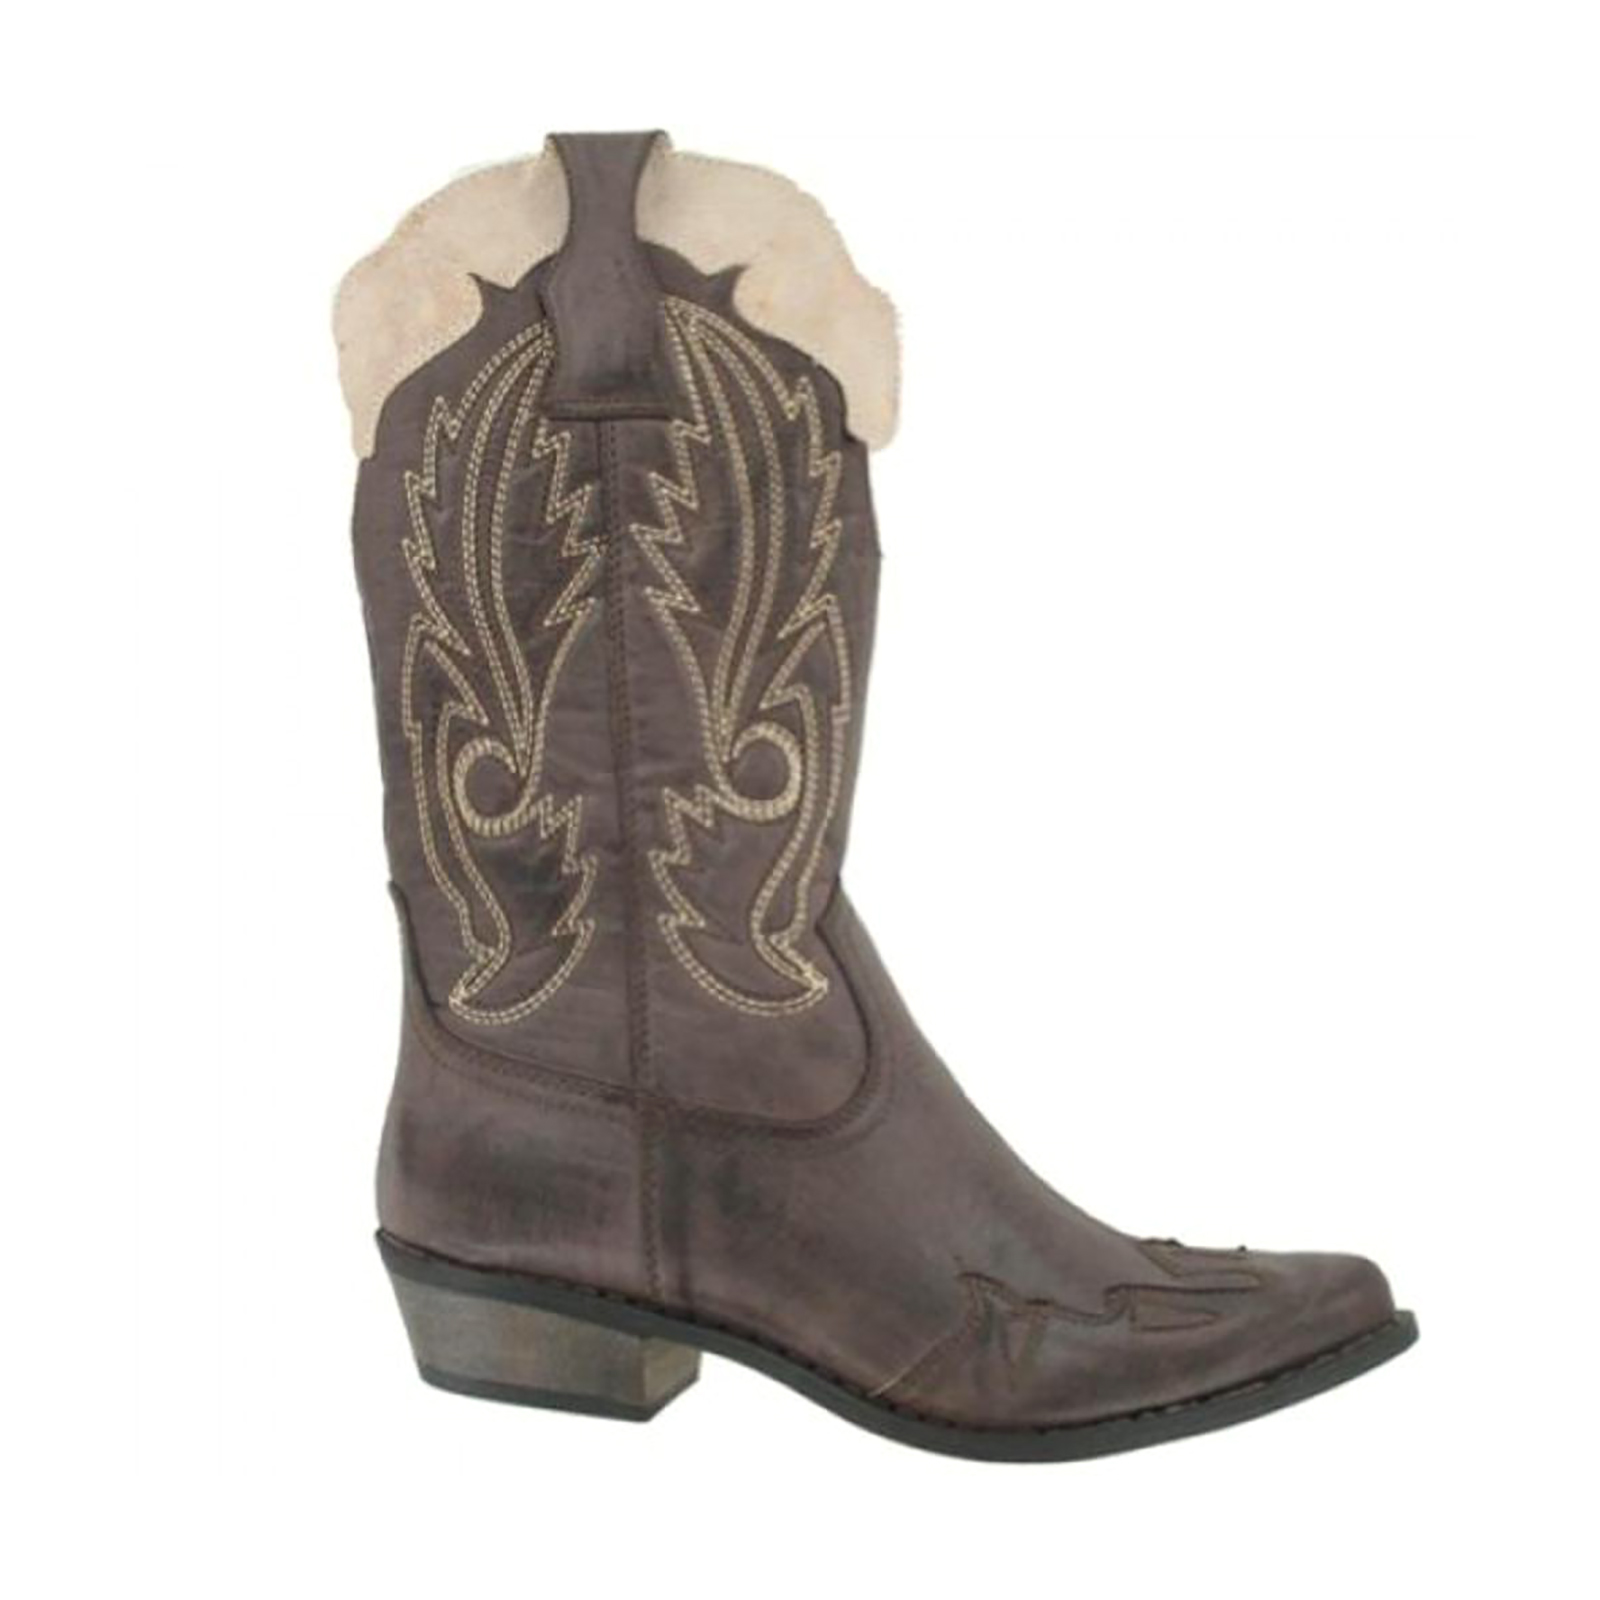 Coconuts by Matisse Cimmaron Cowboy Western Boot,Brown/Brown,8.5